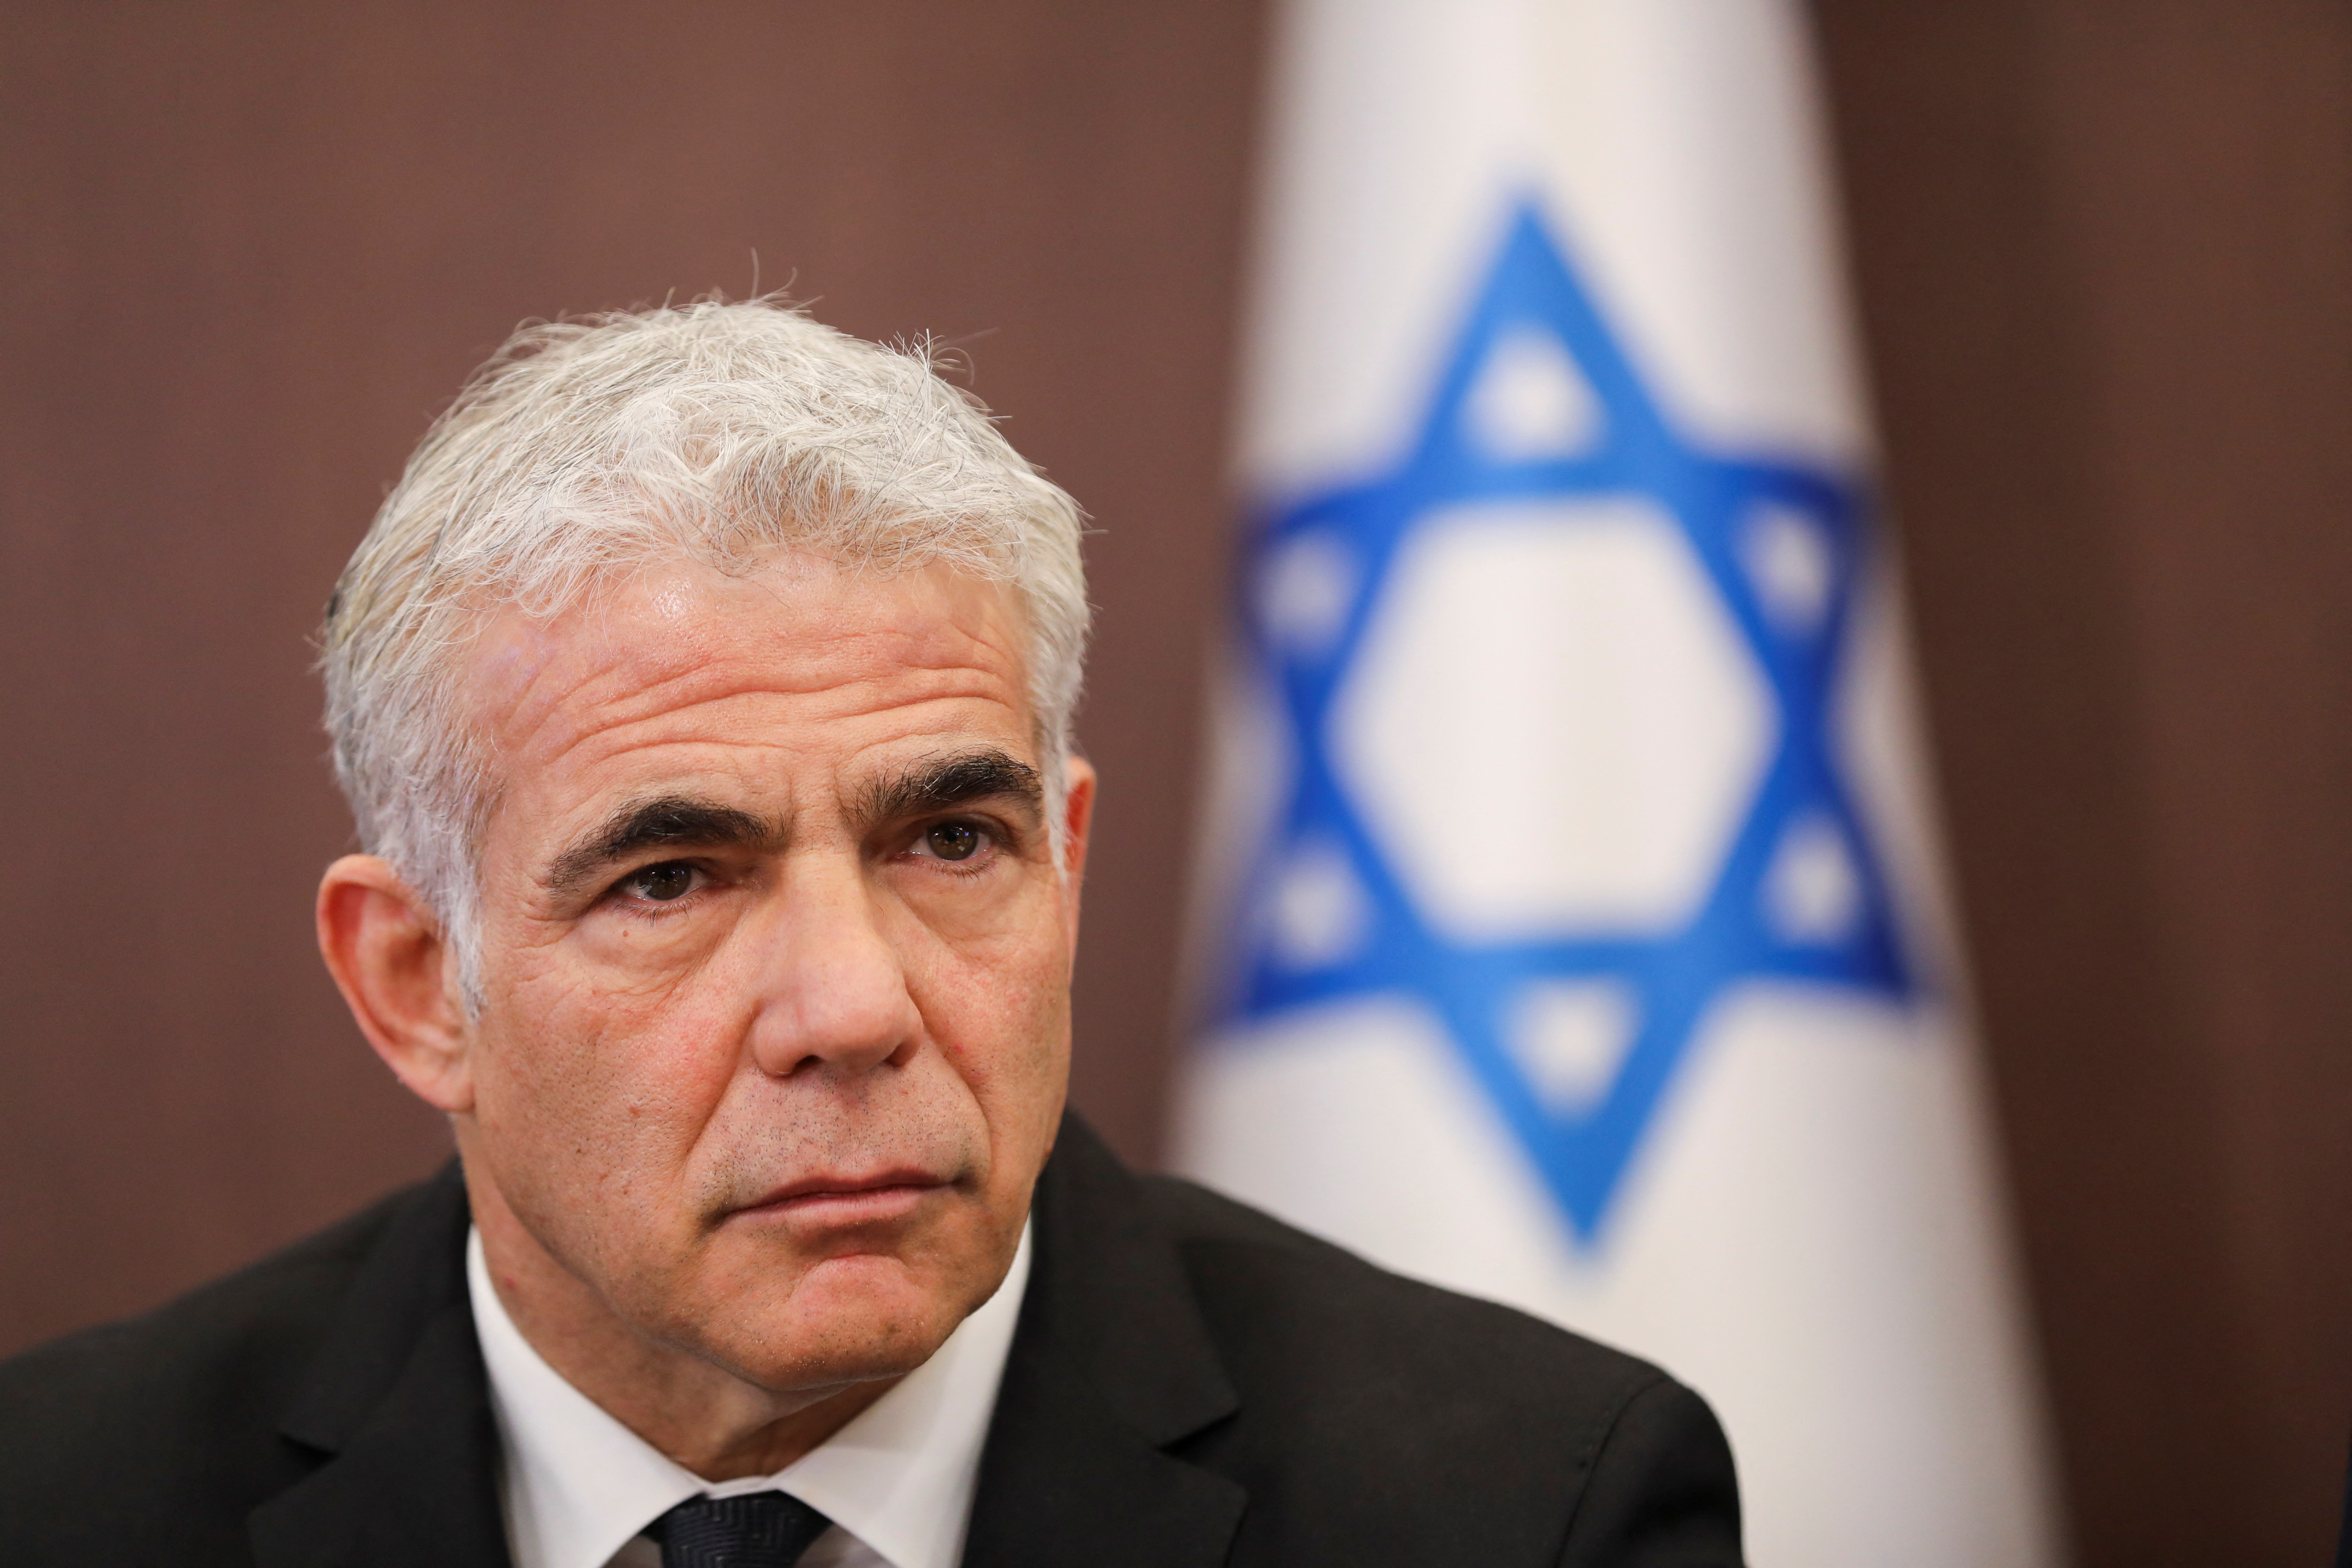 Israeli Foreign Minister Yair Lapid attends a cabinet meeting at the Prime Minister's office in Jerusalem